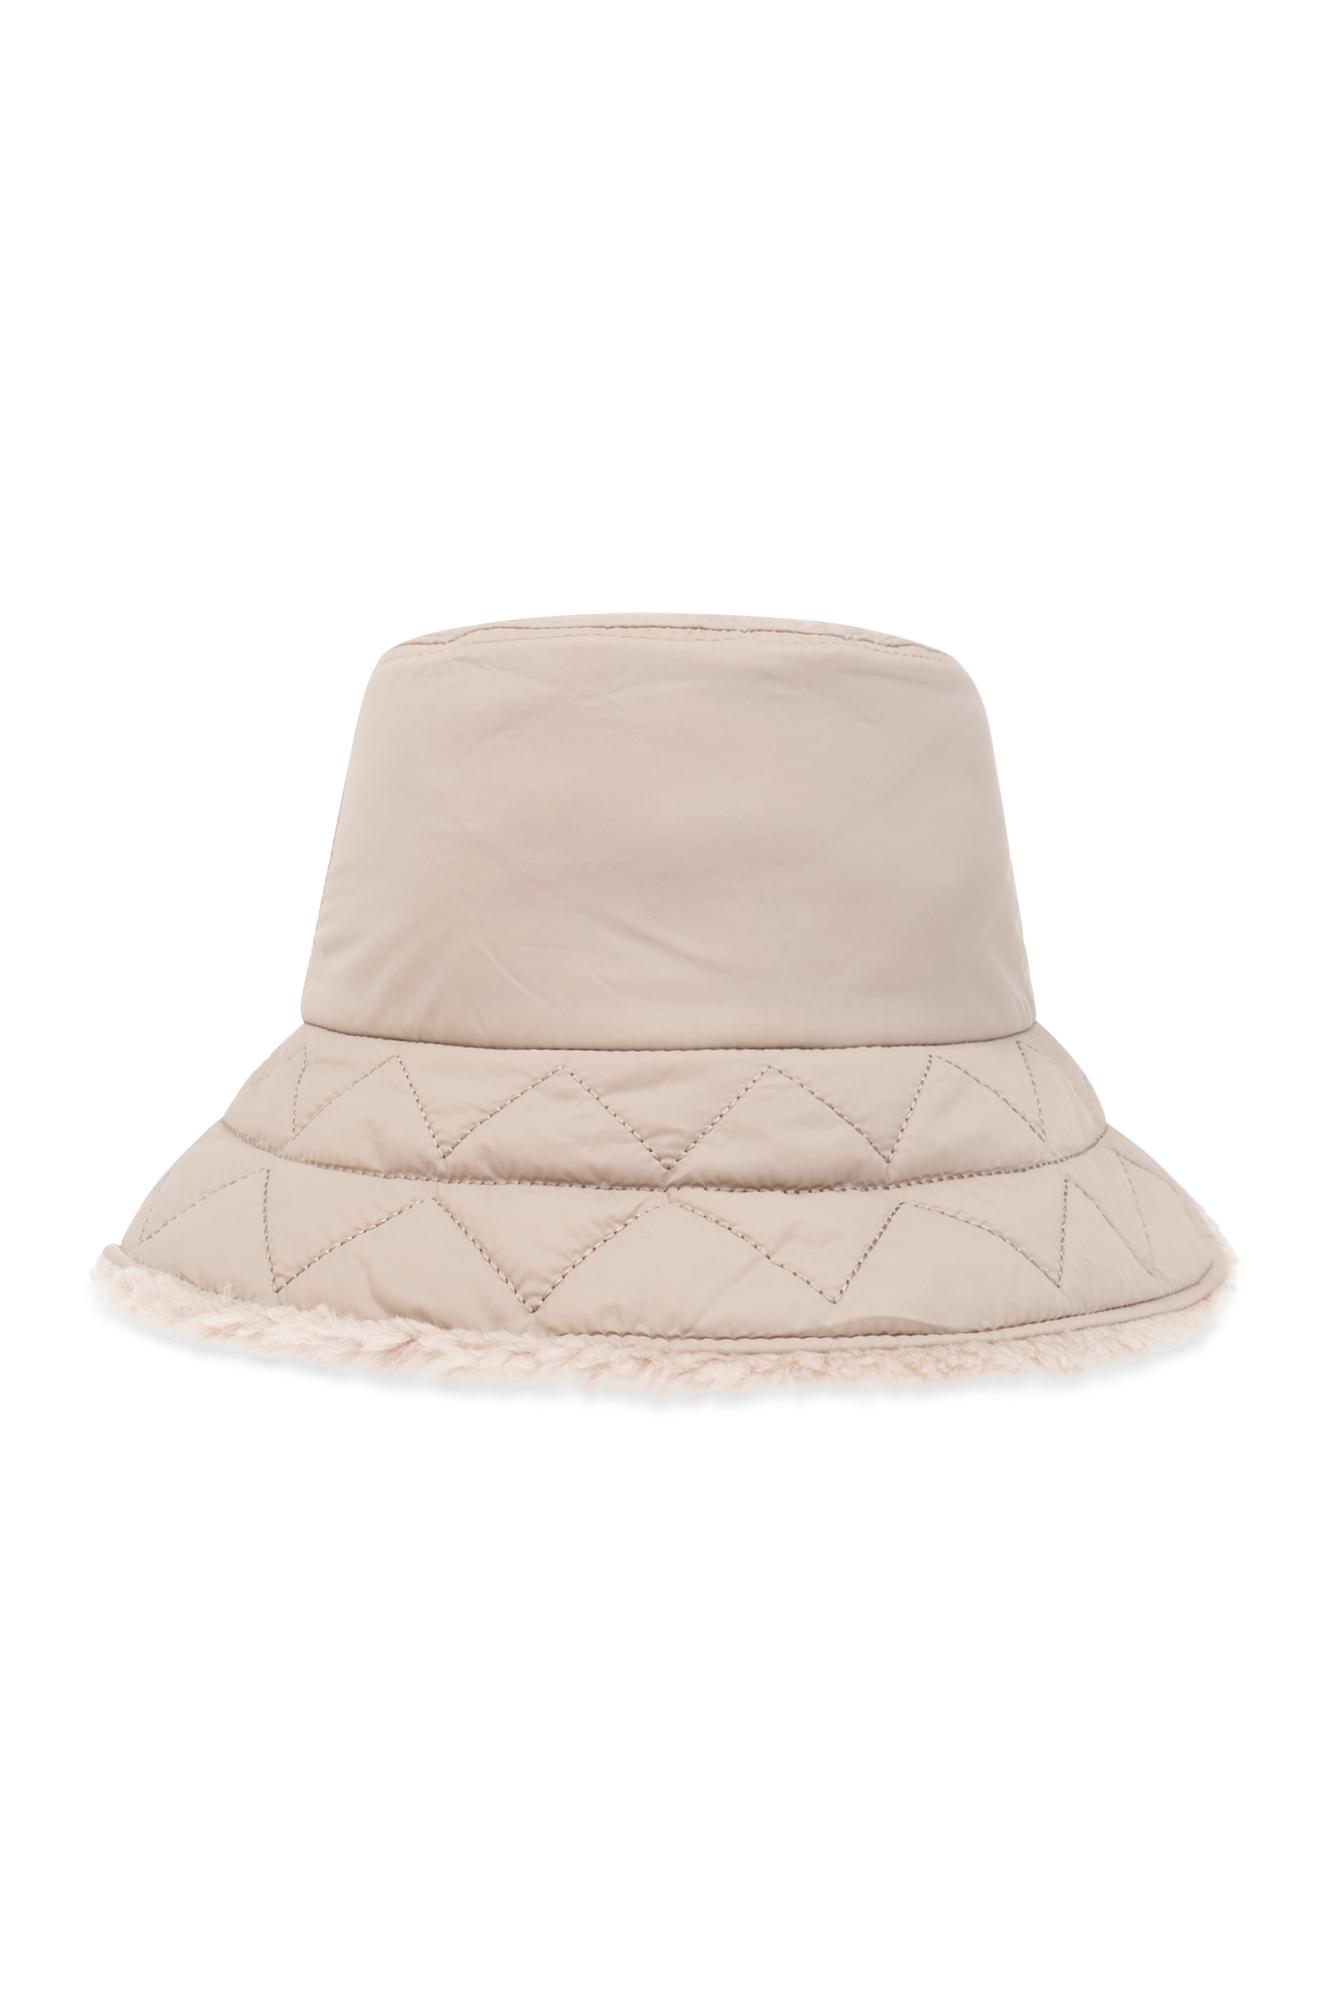 UGG Reversible Bucket Hat in Natural | Lyst